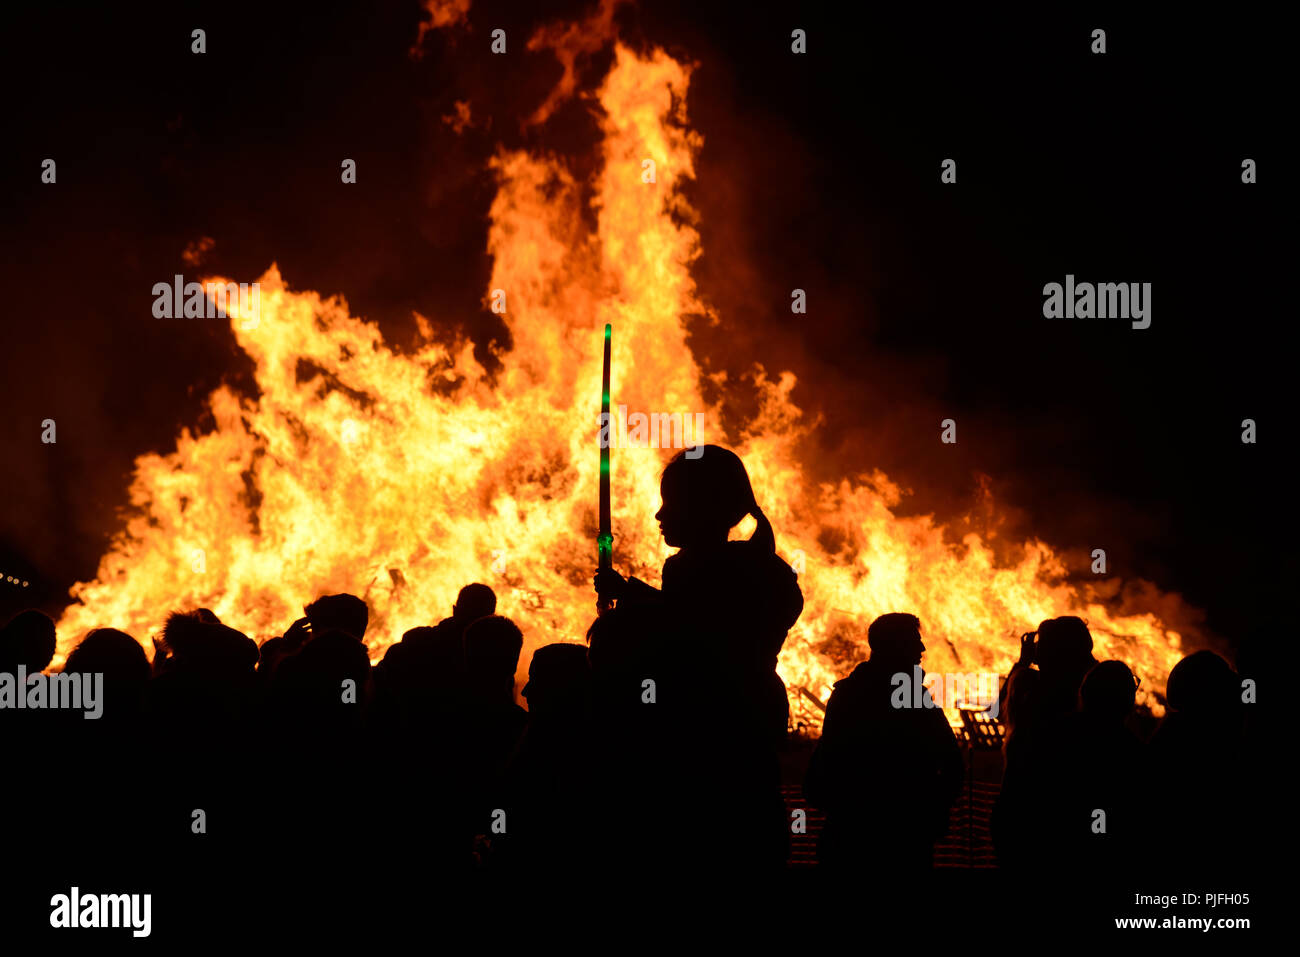 A child and people are silhouetted against the flames of a large bonfire on the 5th of November, Guy Fawkes Night, Bonfire Night. Stock Photo